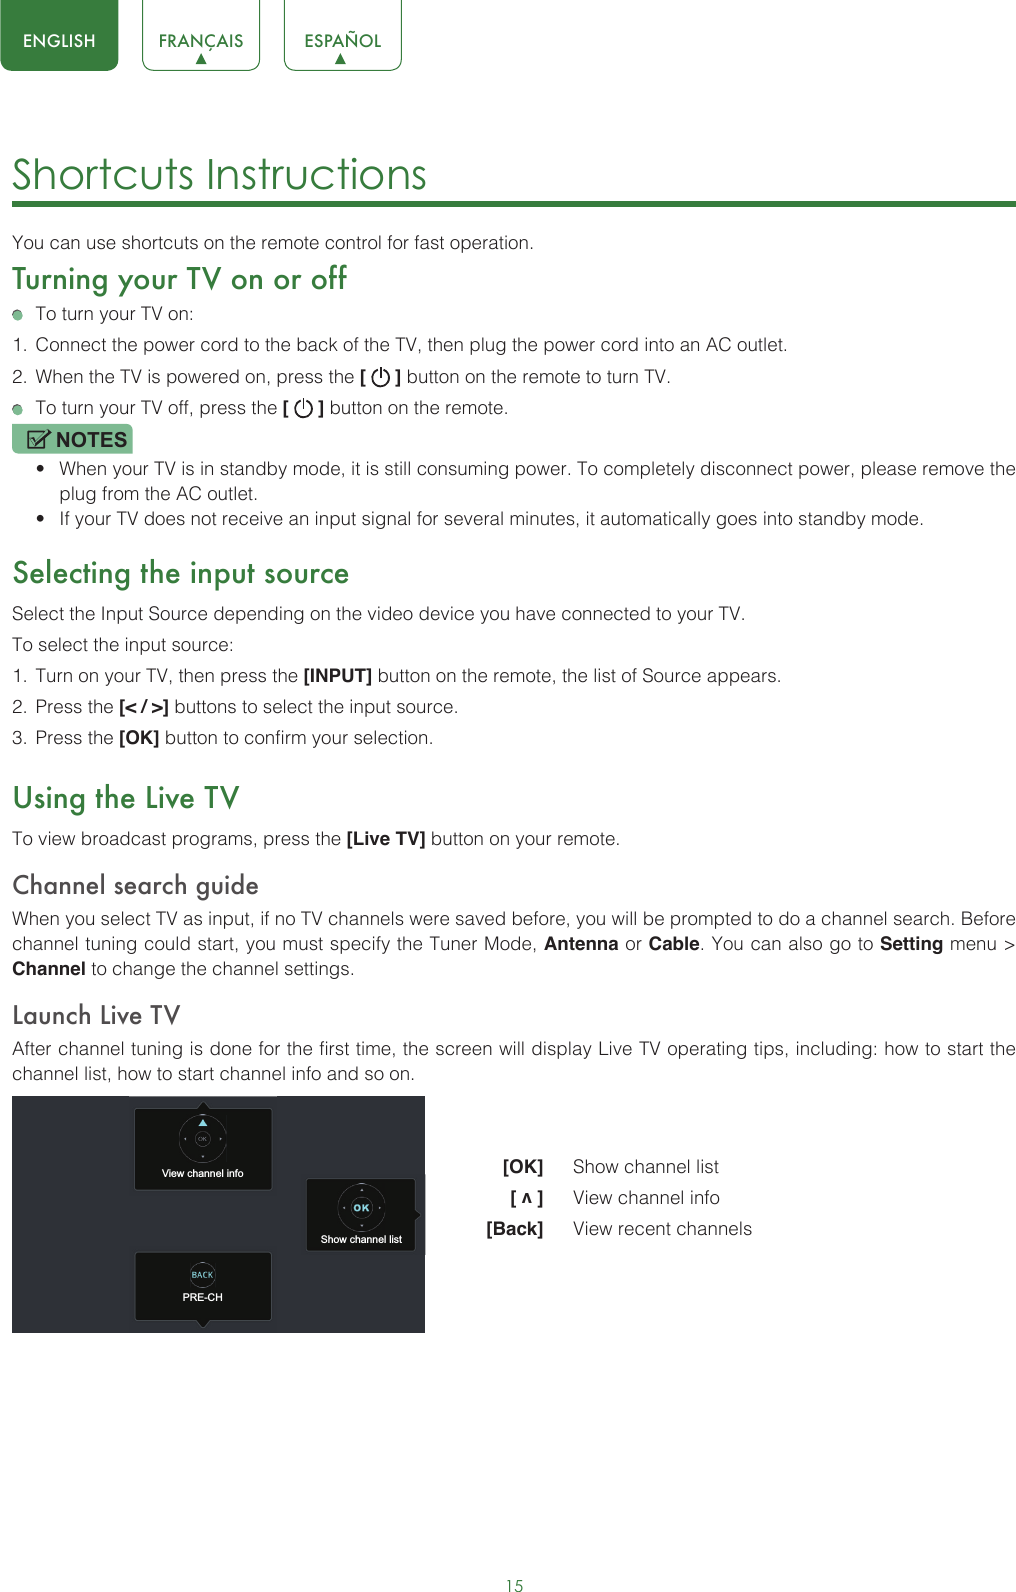 15ENGLISH FRANÇAIS ESPAÑOLShortcuts Instructions You can use shortcuts on the remote control for fast operation. Turning your TV on or off  To turn your TV on:1.  Connect the power cord to the back of the TV, then plug the power cord into an AC outlet.2.  When the TV is powered on, press the [   ] button on the remote to turn TV.  To turn your TV off, press the [   ] button on the remote.NOTES• When your TV is in standby mode, it is still consuming power. To completely disconnect power, please remove the  plug from the AC outlet.• If your TV does not receive an input signal for several minutes, it automatically goes into standby mode.Selecting the input sourceSelect the Input Source depending on the video device you have connected to your TV.To select the input source:1.  Turn on your TV, then press the [INPUT] button on the remote, the list of Source appears.2.  Press the [&lt; / &gt;] buttons to select the input source.3.  Press the [OK] button to confirm your selection.Using the Live TVTo view broadcast programs, press the [Live TV] button on your remote.Channel search guideWhen you select TV as input, if no TV channels were saved before, you will be prompted to do a channel search. Before channel tuning could start, you must specify the Tuner Mode, Antenna or Cable. You can also go to Setting menu &gt; Channel to change the channel settings.Launch Live TVAfter channel tuning is done for the first time, the screen will display Live TV operating tips, including: how to start the channel list, how to start channel info and so on.  [OK]   Show channel list [ v ]   View channel info [Back]   View recent channelsView channel infoPRE-CHShow channel list